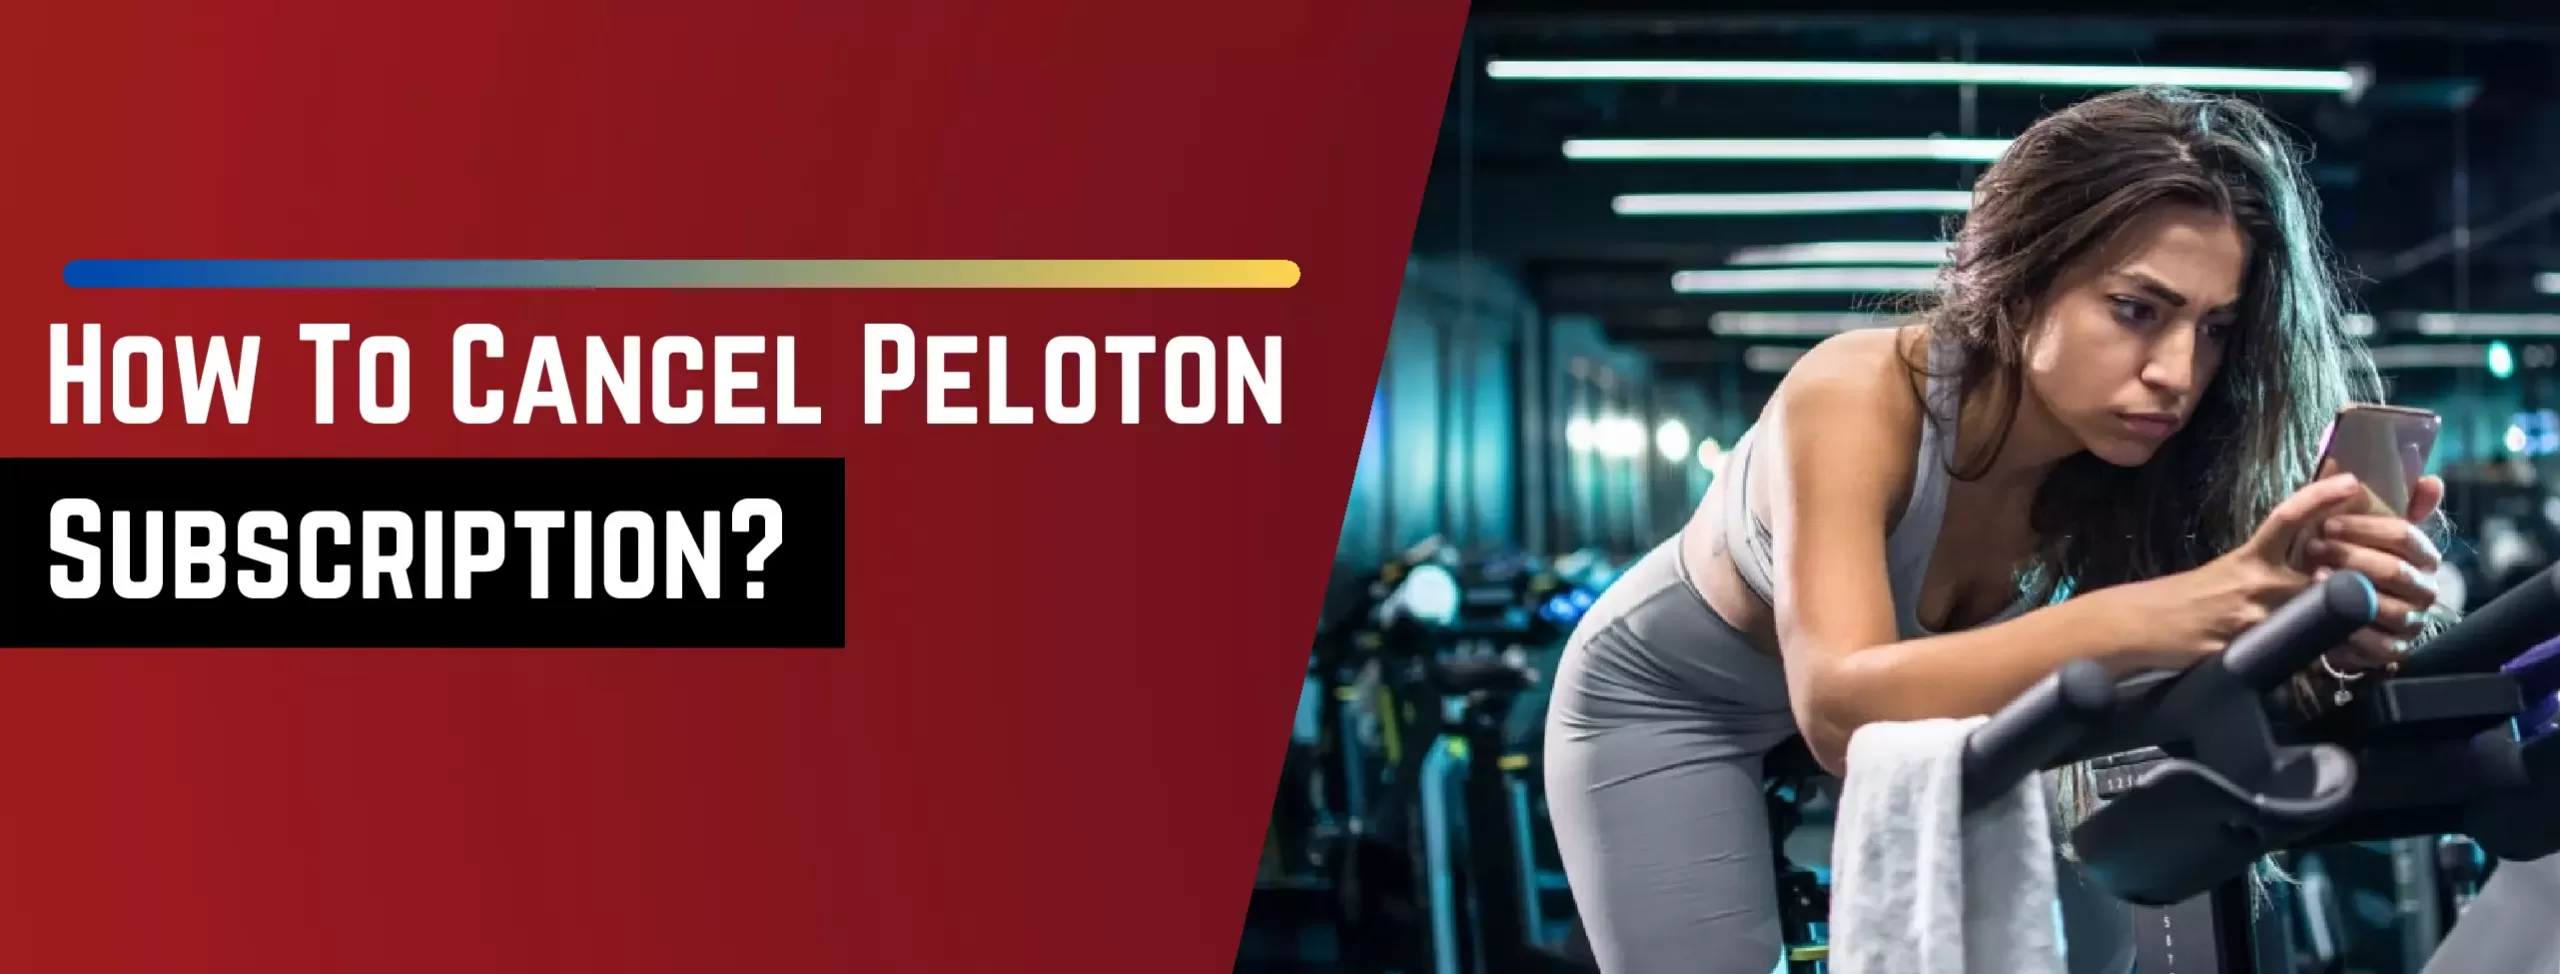 How To Cancel Peloton Subscription